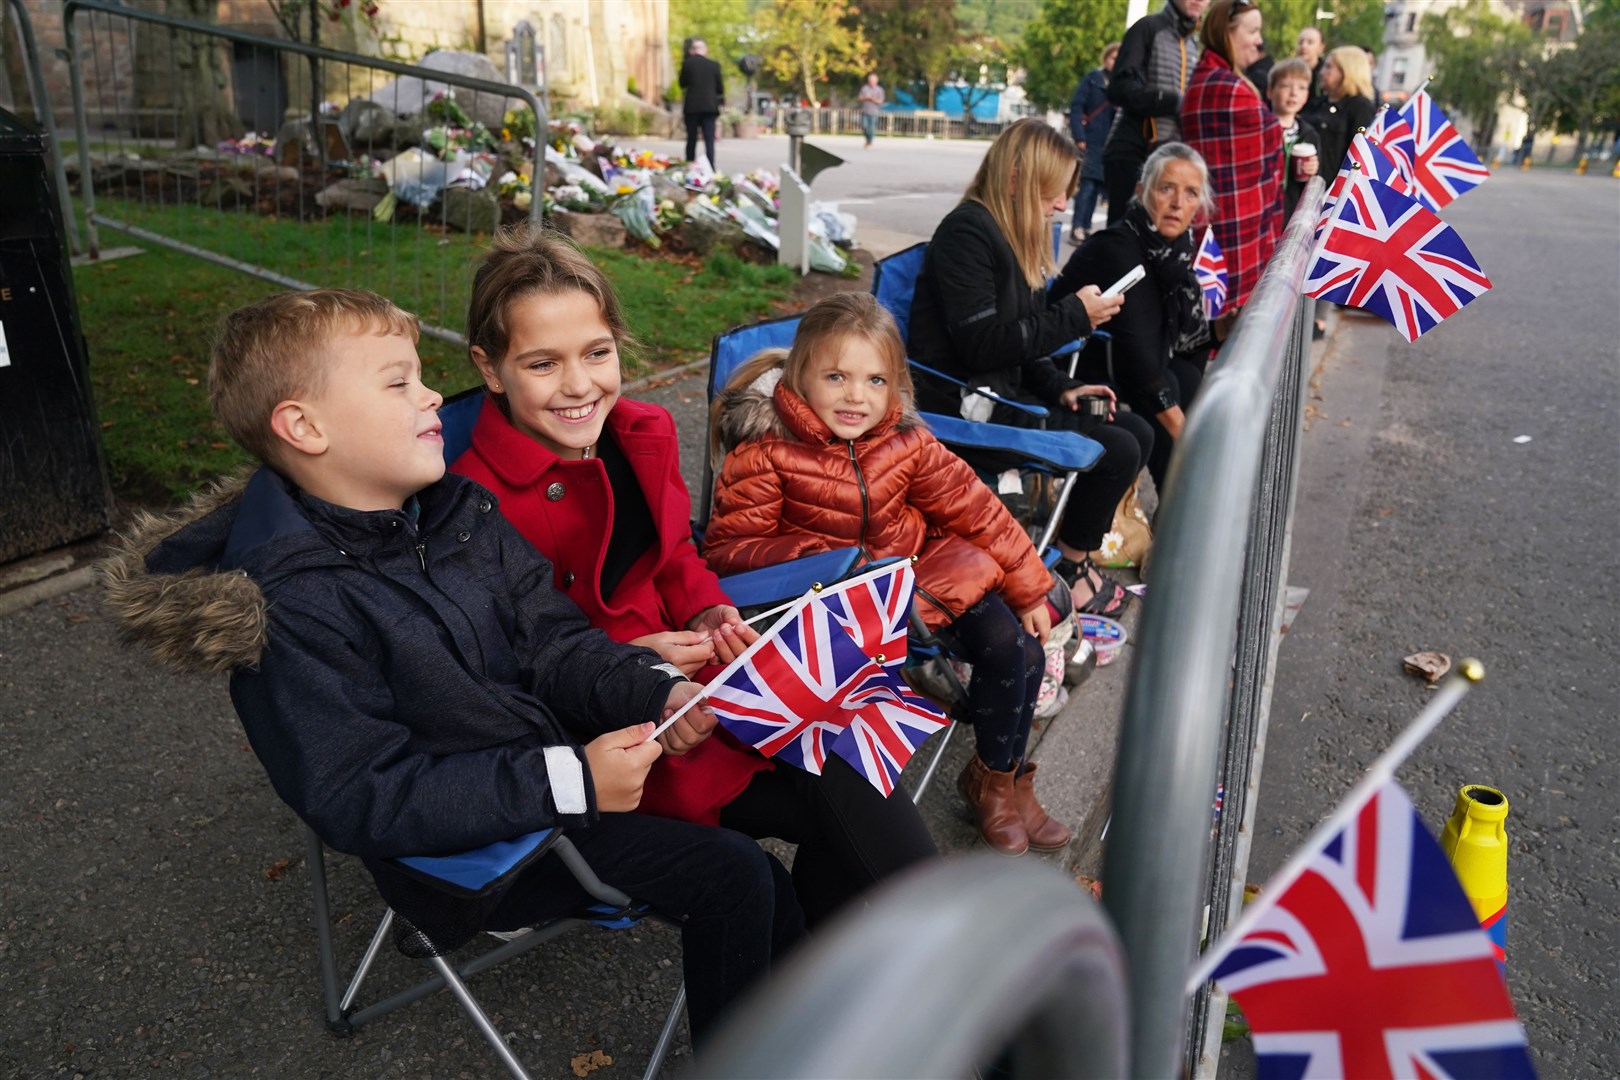 Members of the public in Ballater ahead of the cortege’s arrival (Andrew Milligan/PA)